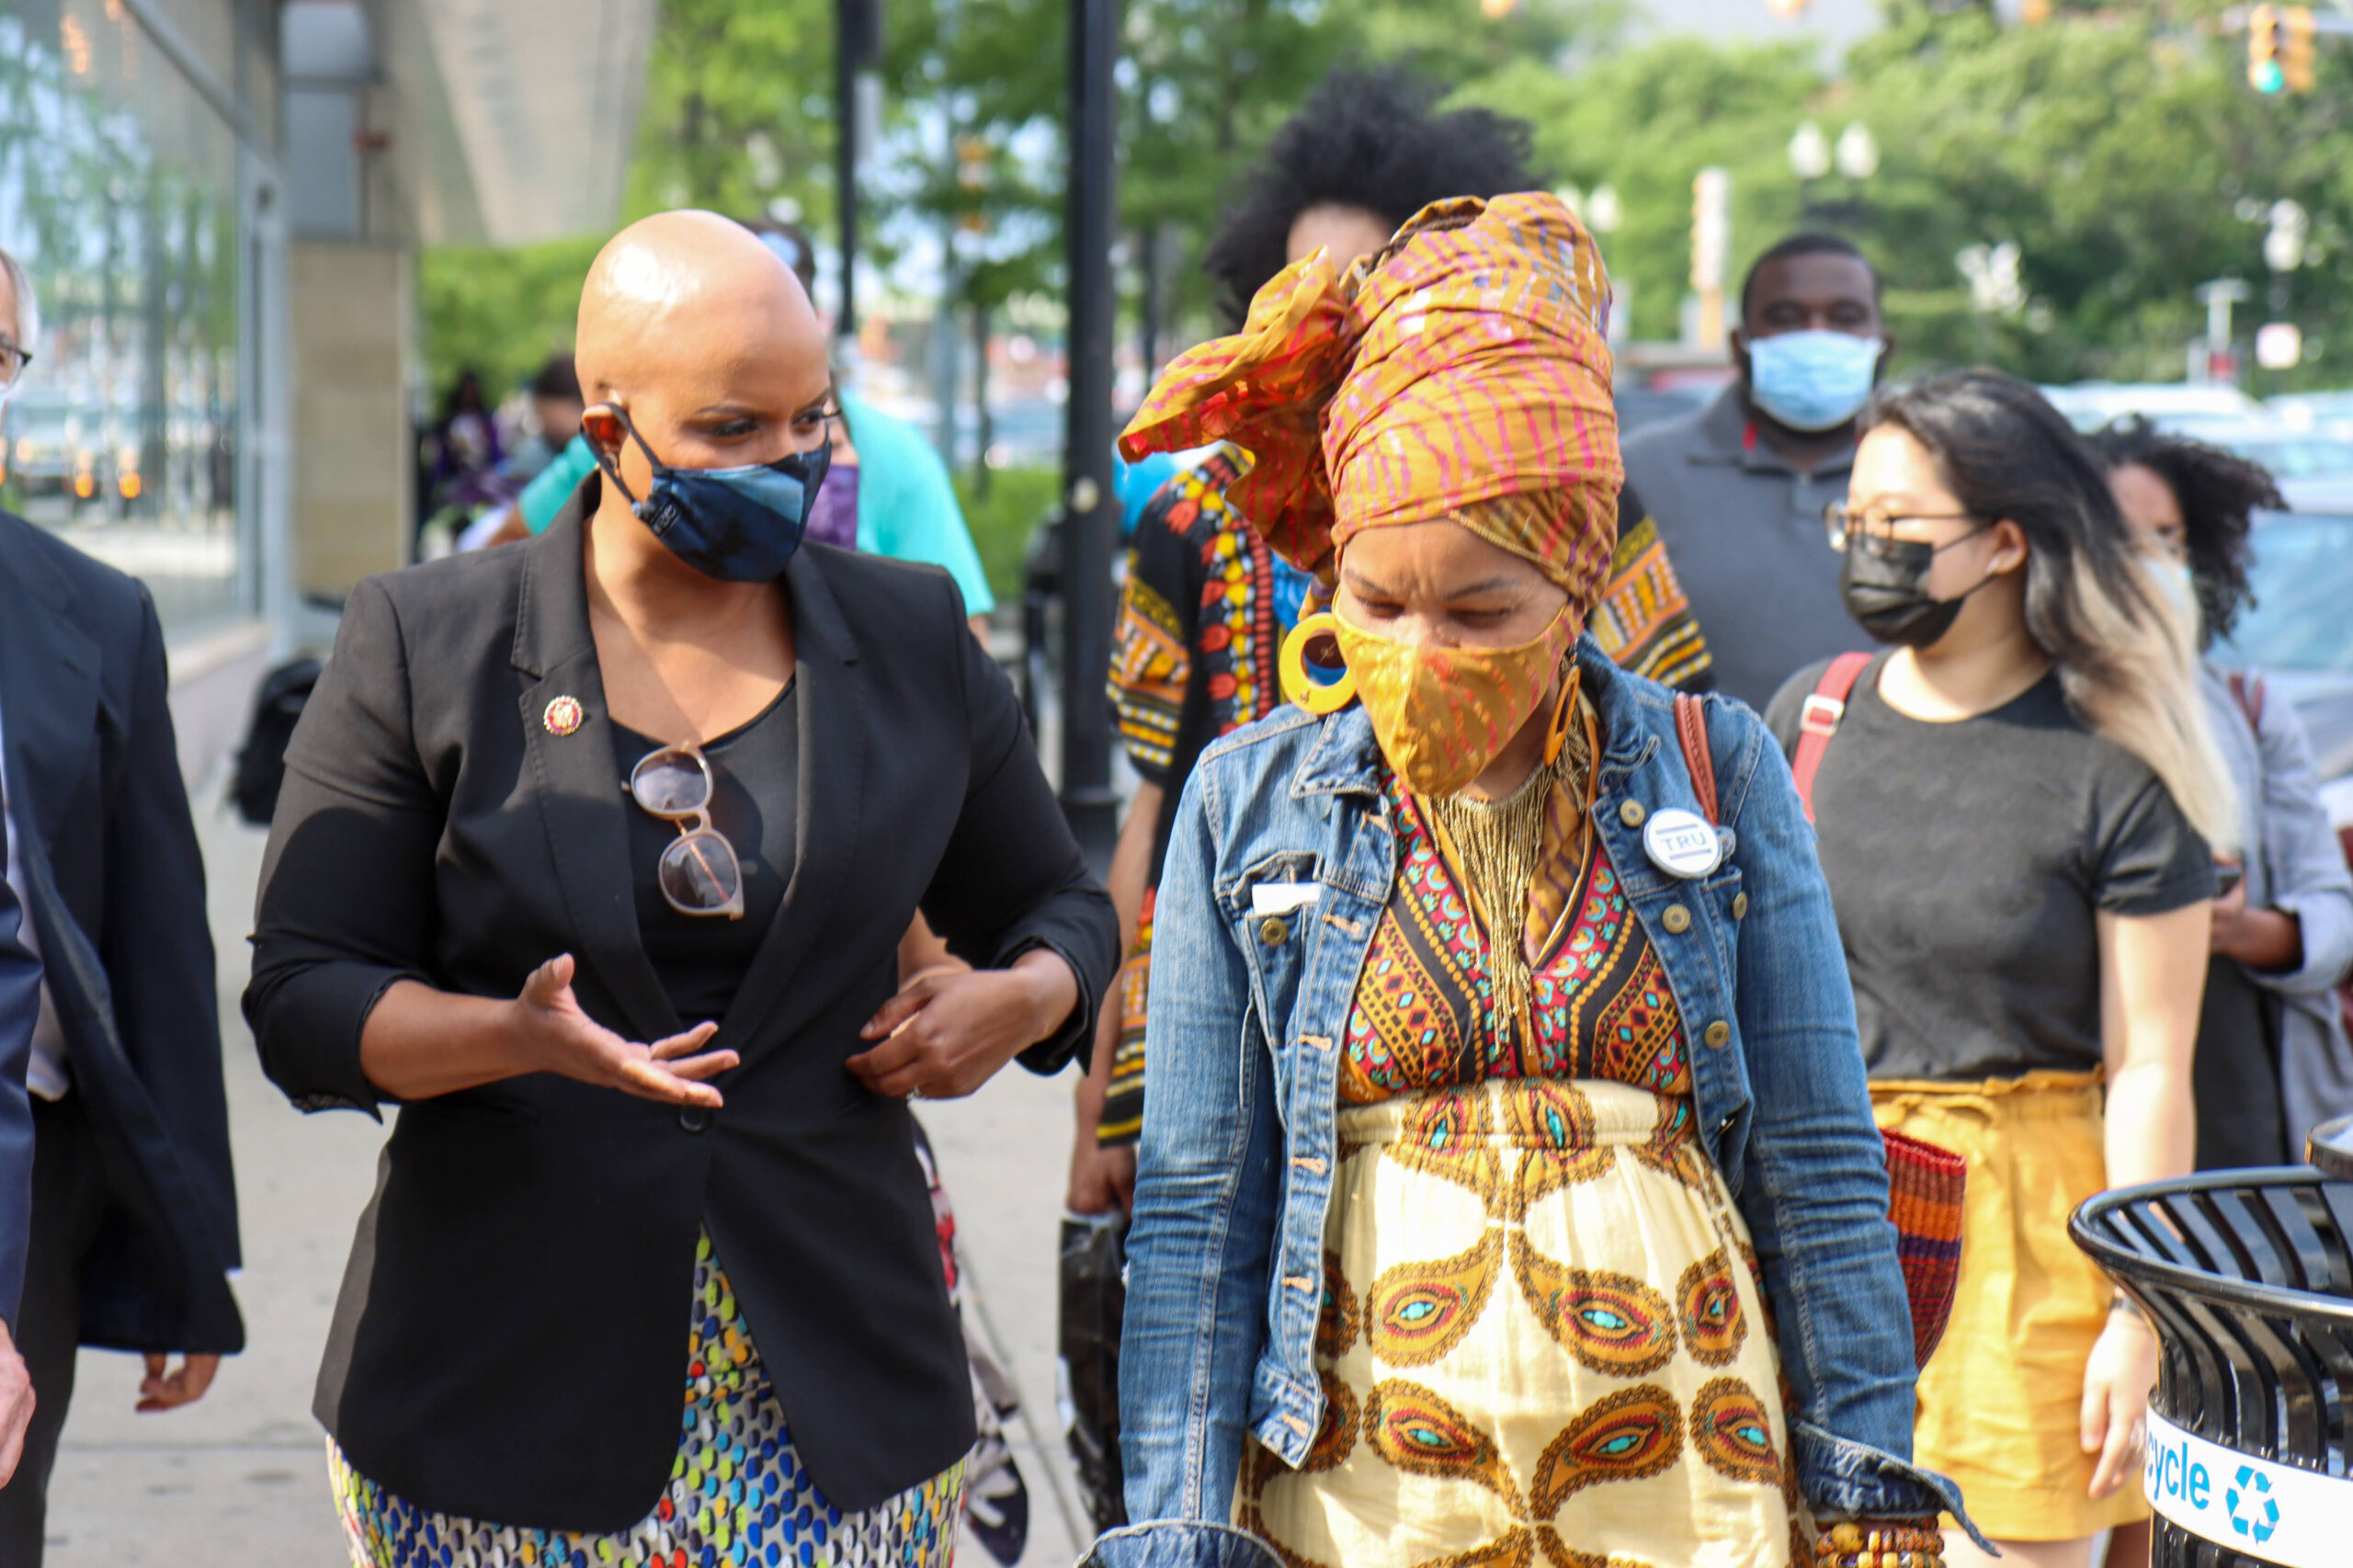 Photo showing Rep. Pressley walking next to a woman in a crowd. Both are wearing masks to prevent against the spread of COVID-19.